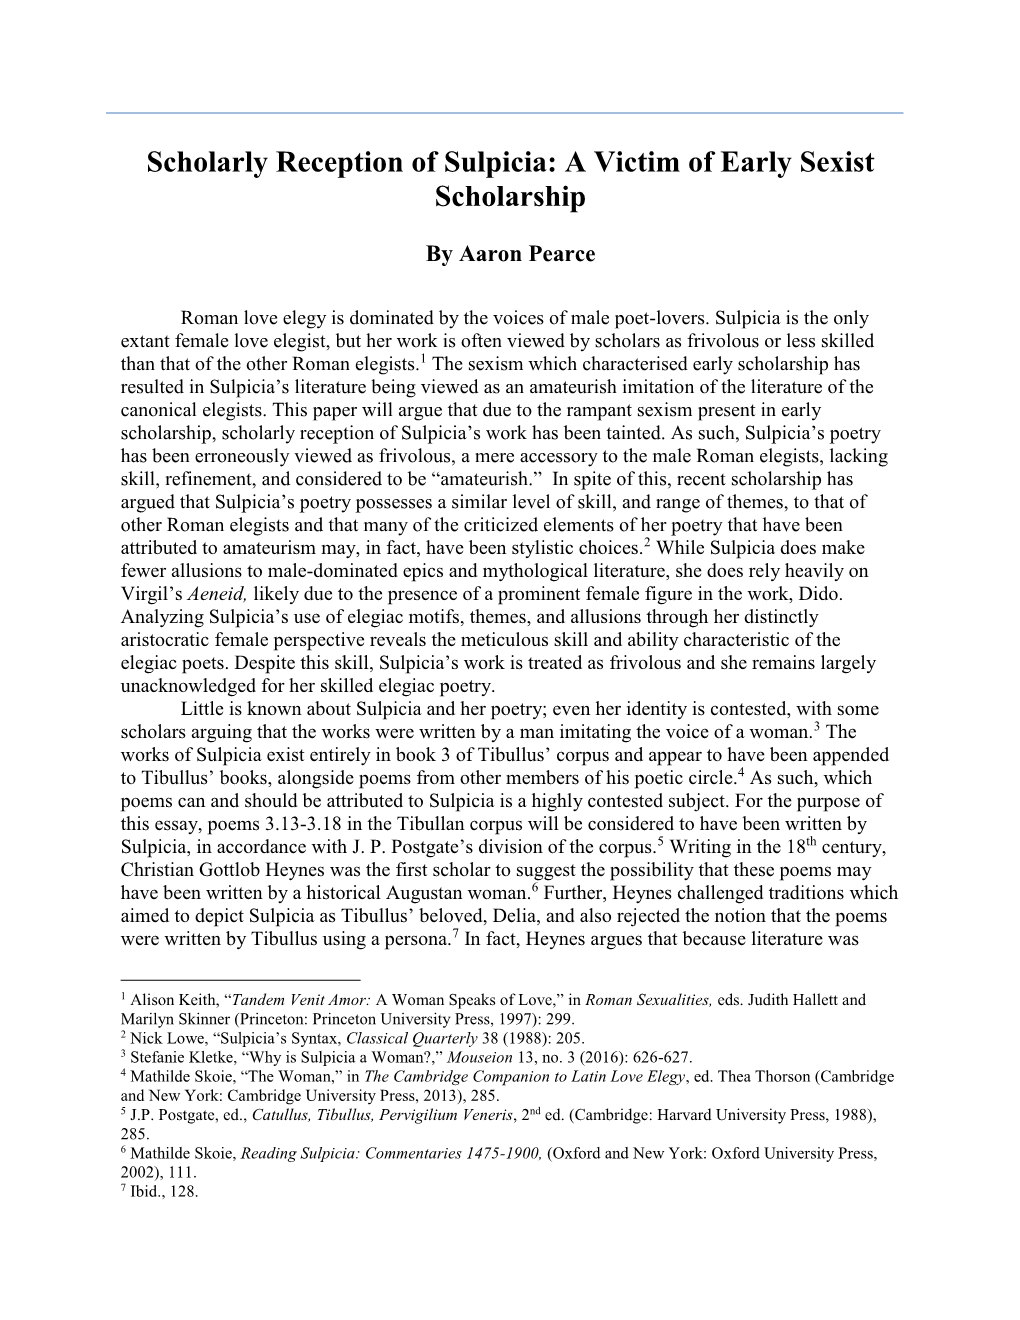 Scholarly Reception of Sulpicia: a Victim of Early Sexist Scholarship